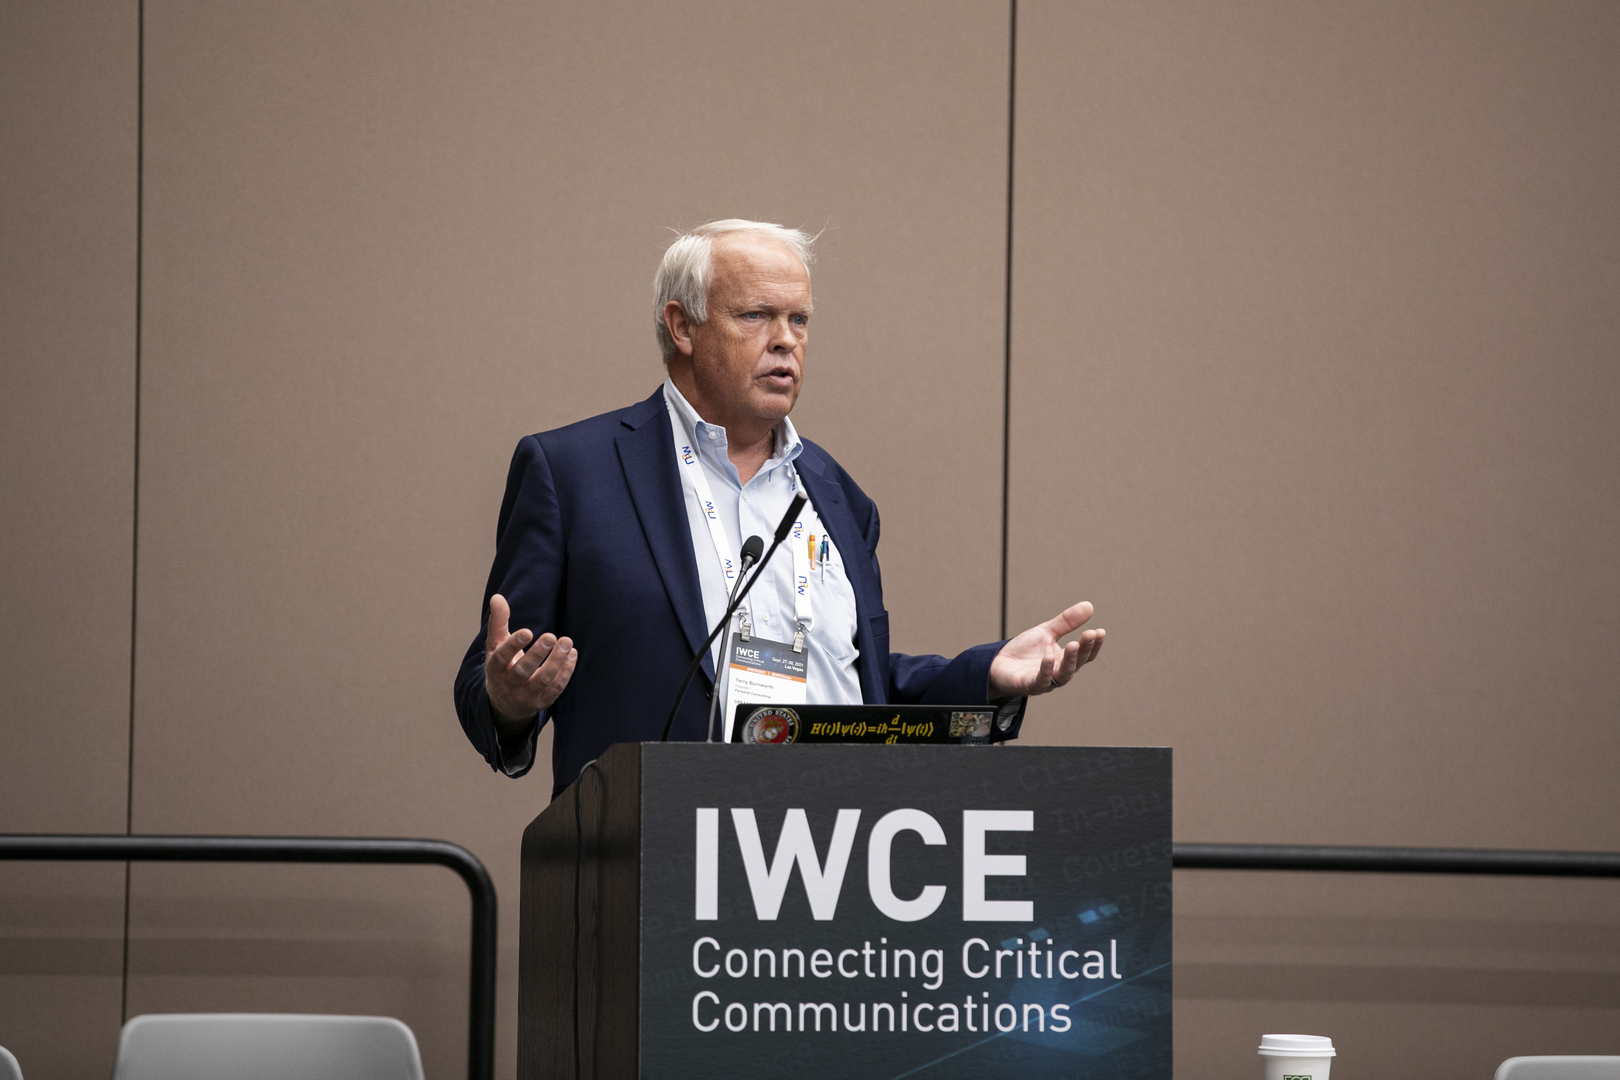 IWCE 2022: March 21 - 24, Las Vegas Convention Center